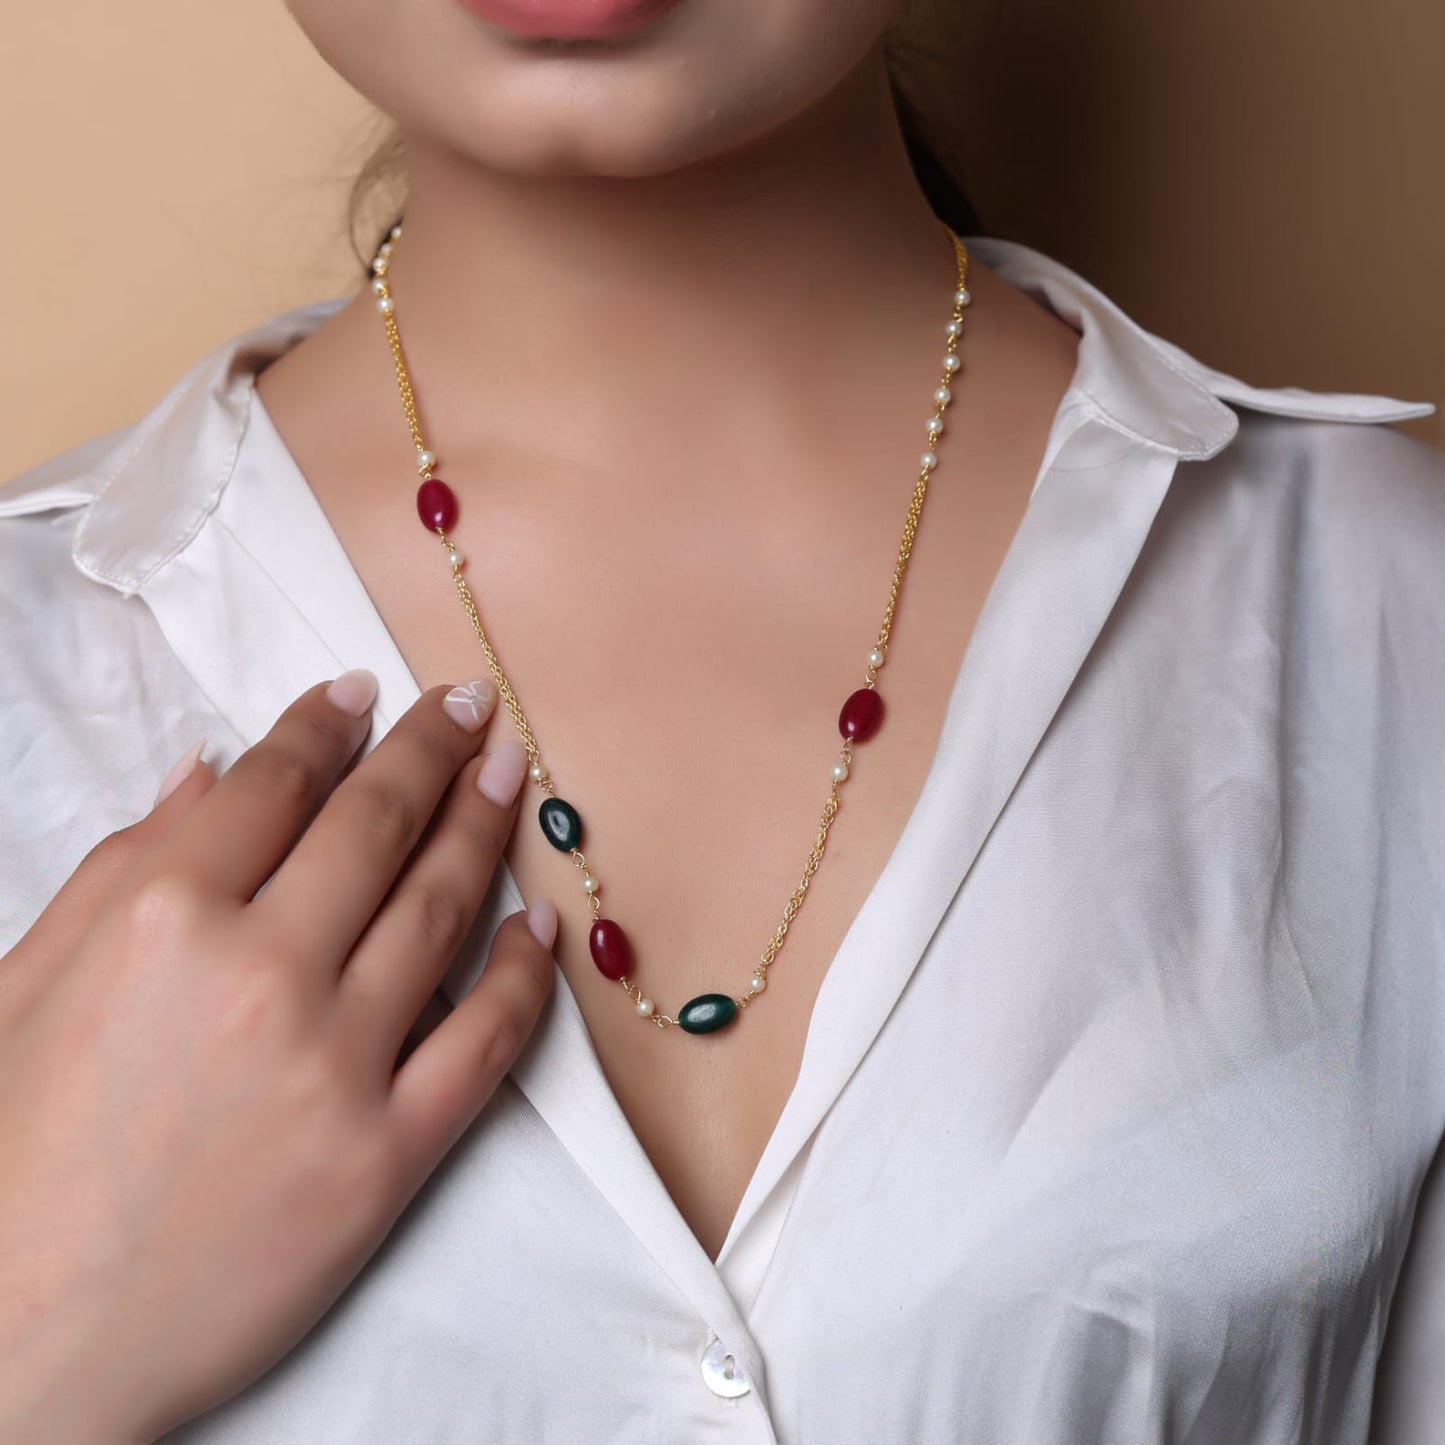 Sterling Silver Gold plated
Ruby Quartz and green Quartz beads necklace chain.